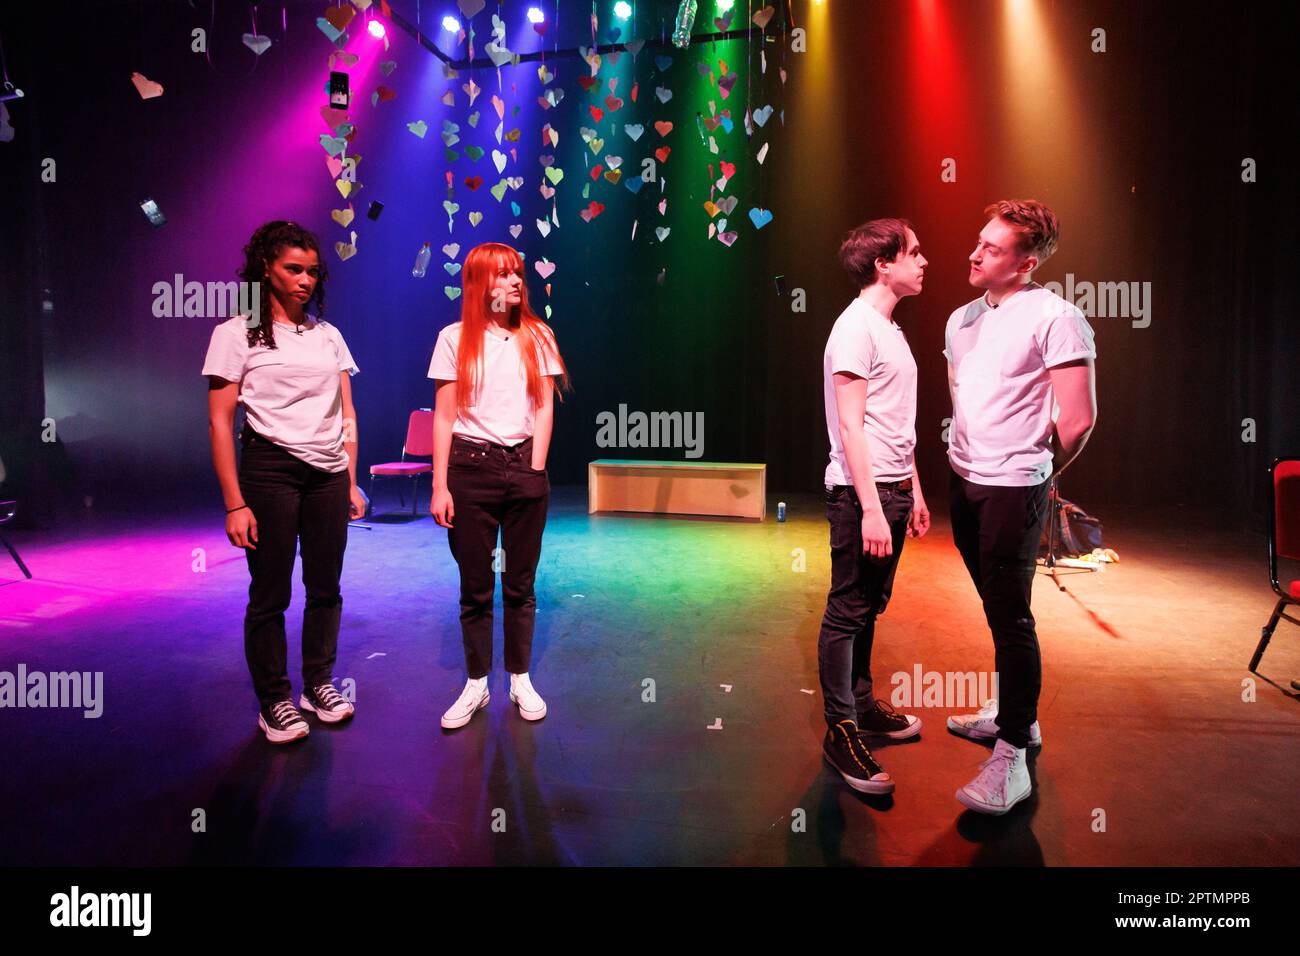 Picture taken at Final rehersal for ENACT: Volume One, a series of original plays written and developed in response to Young People's experiences and observations of healthy relationships through participatory workshops in schools. The plays were performed by the Cherwell Theatre Company. Pictured, the cast on stage, Krage Brown, Olivia Sinclair, Kylie Bates, Ross Tomlinson, Zoe Croft. Stock Photo